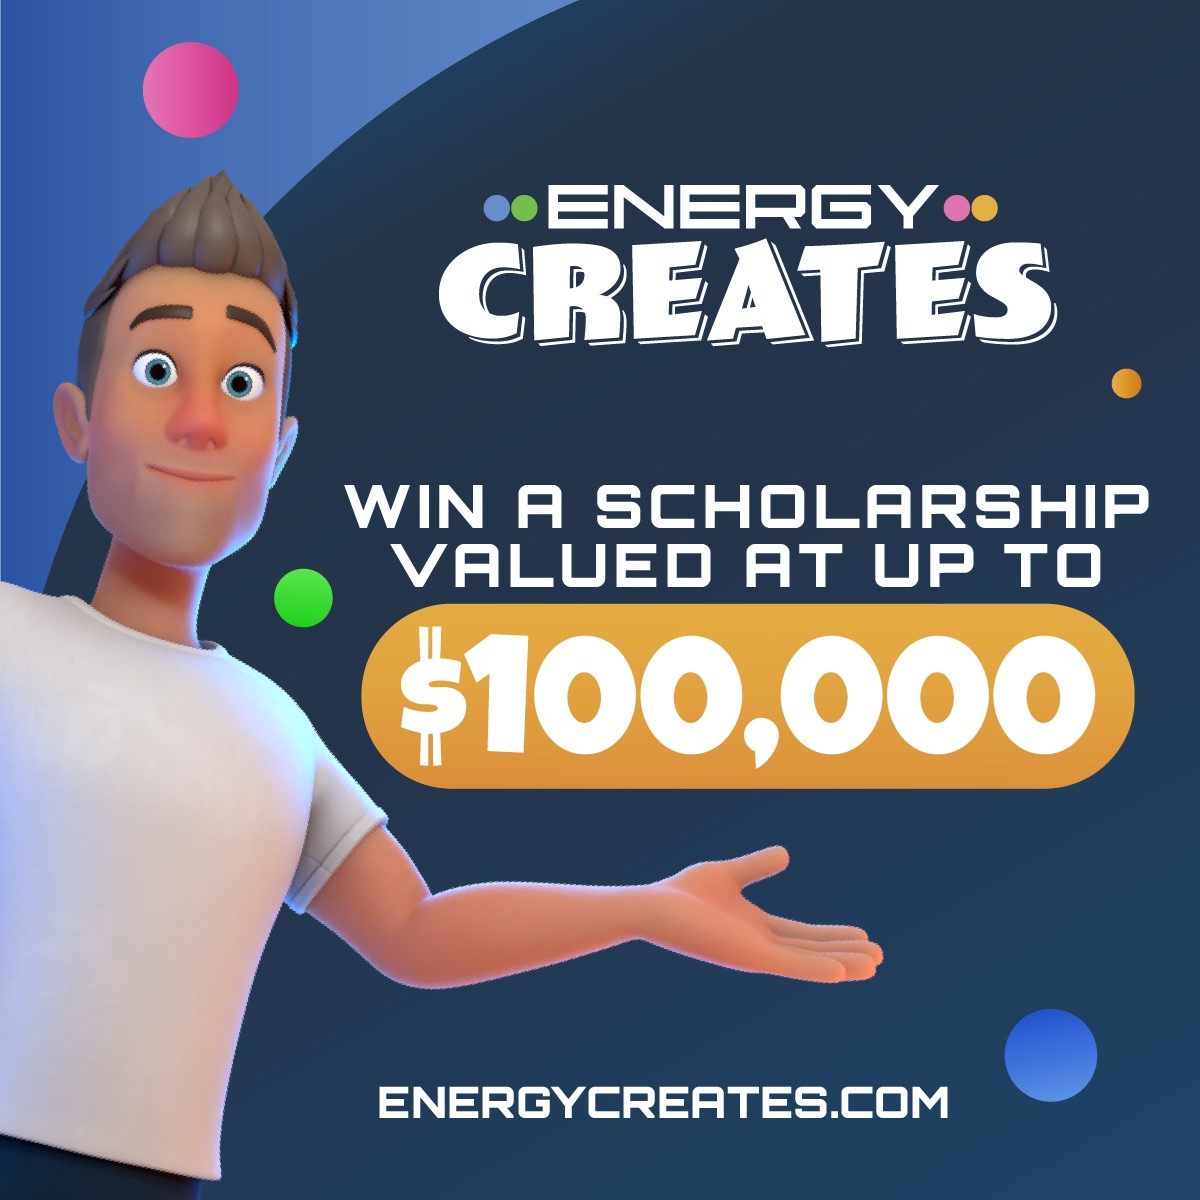 Win a scholarship values at up to $100,000